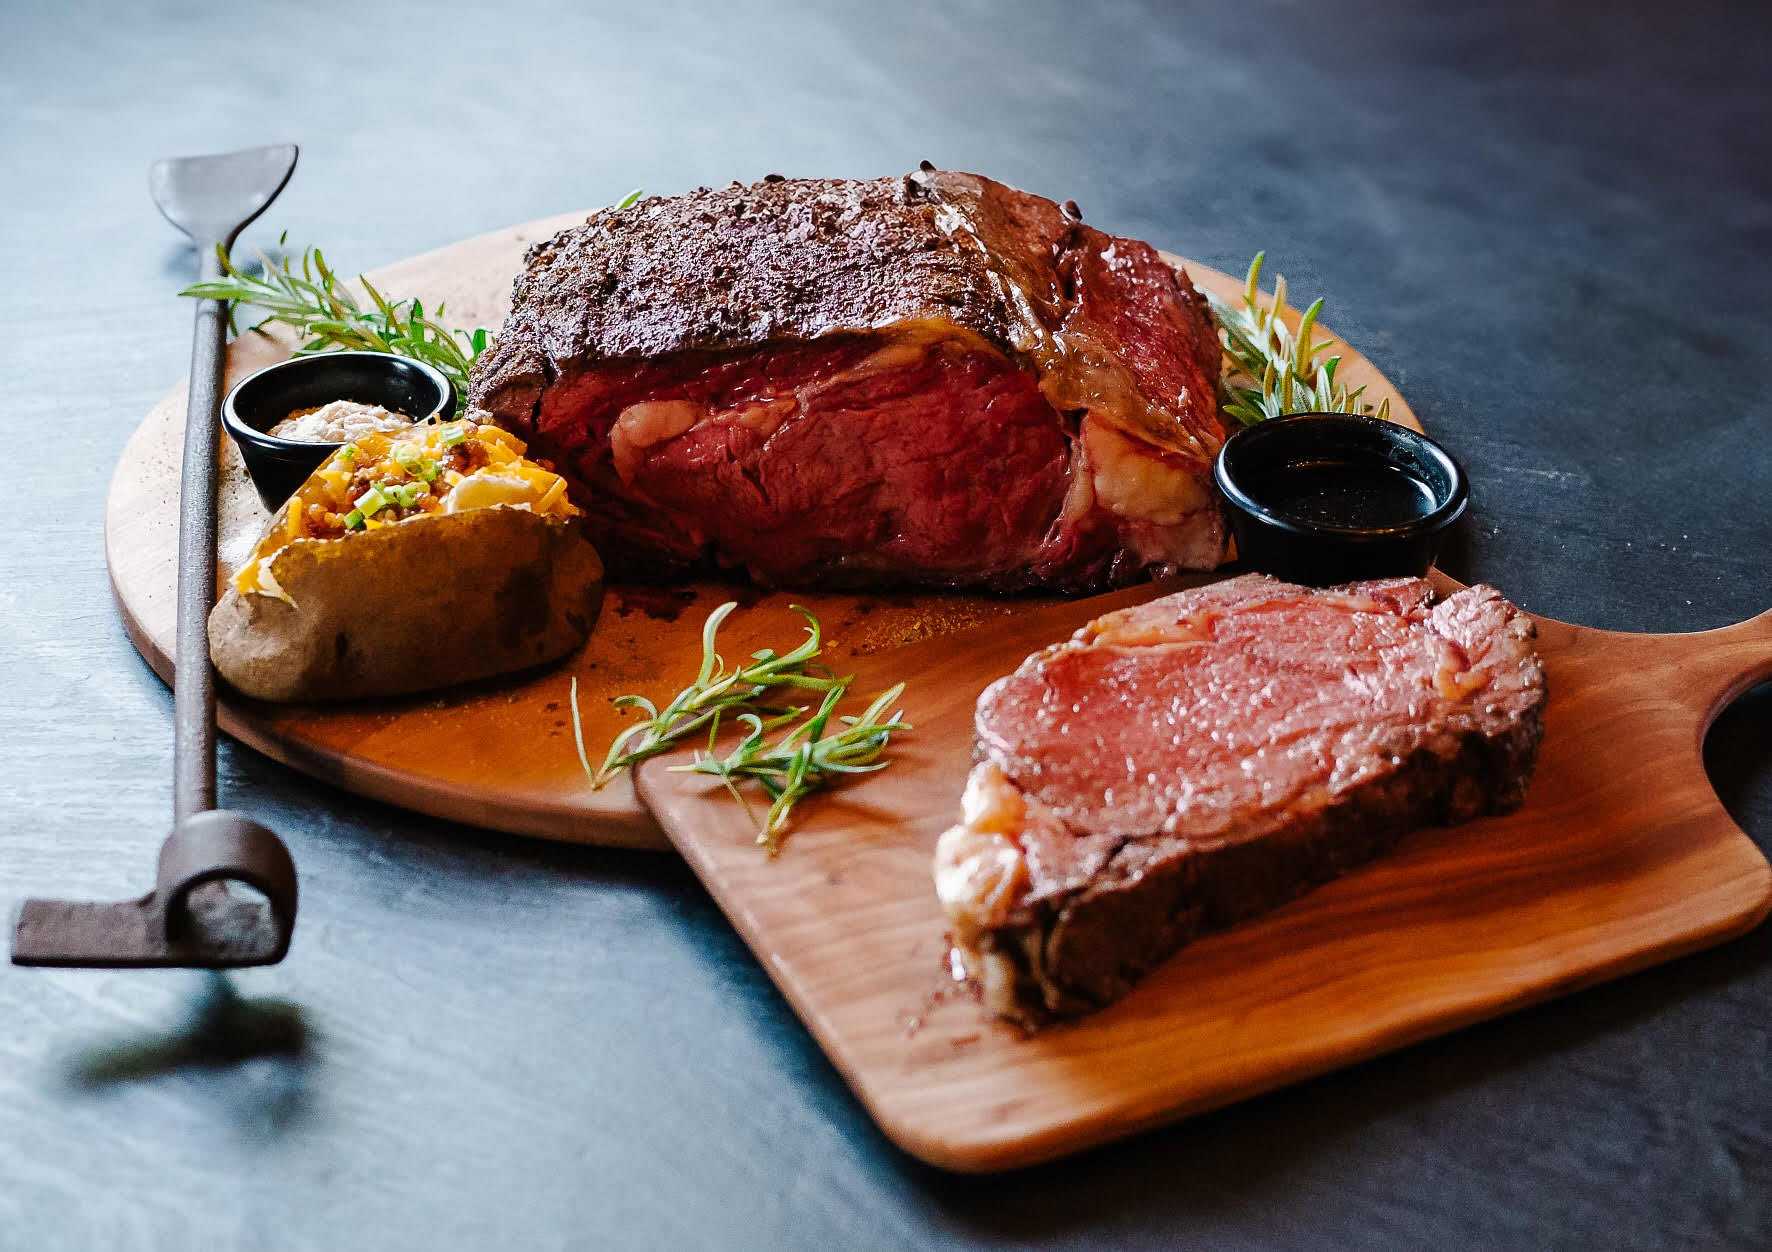 Prime rib roast on a wooden board with baked potato, herbs, and dipping sauces.